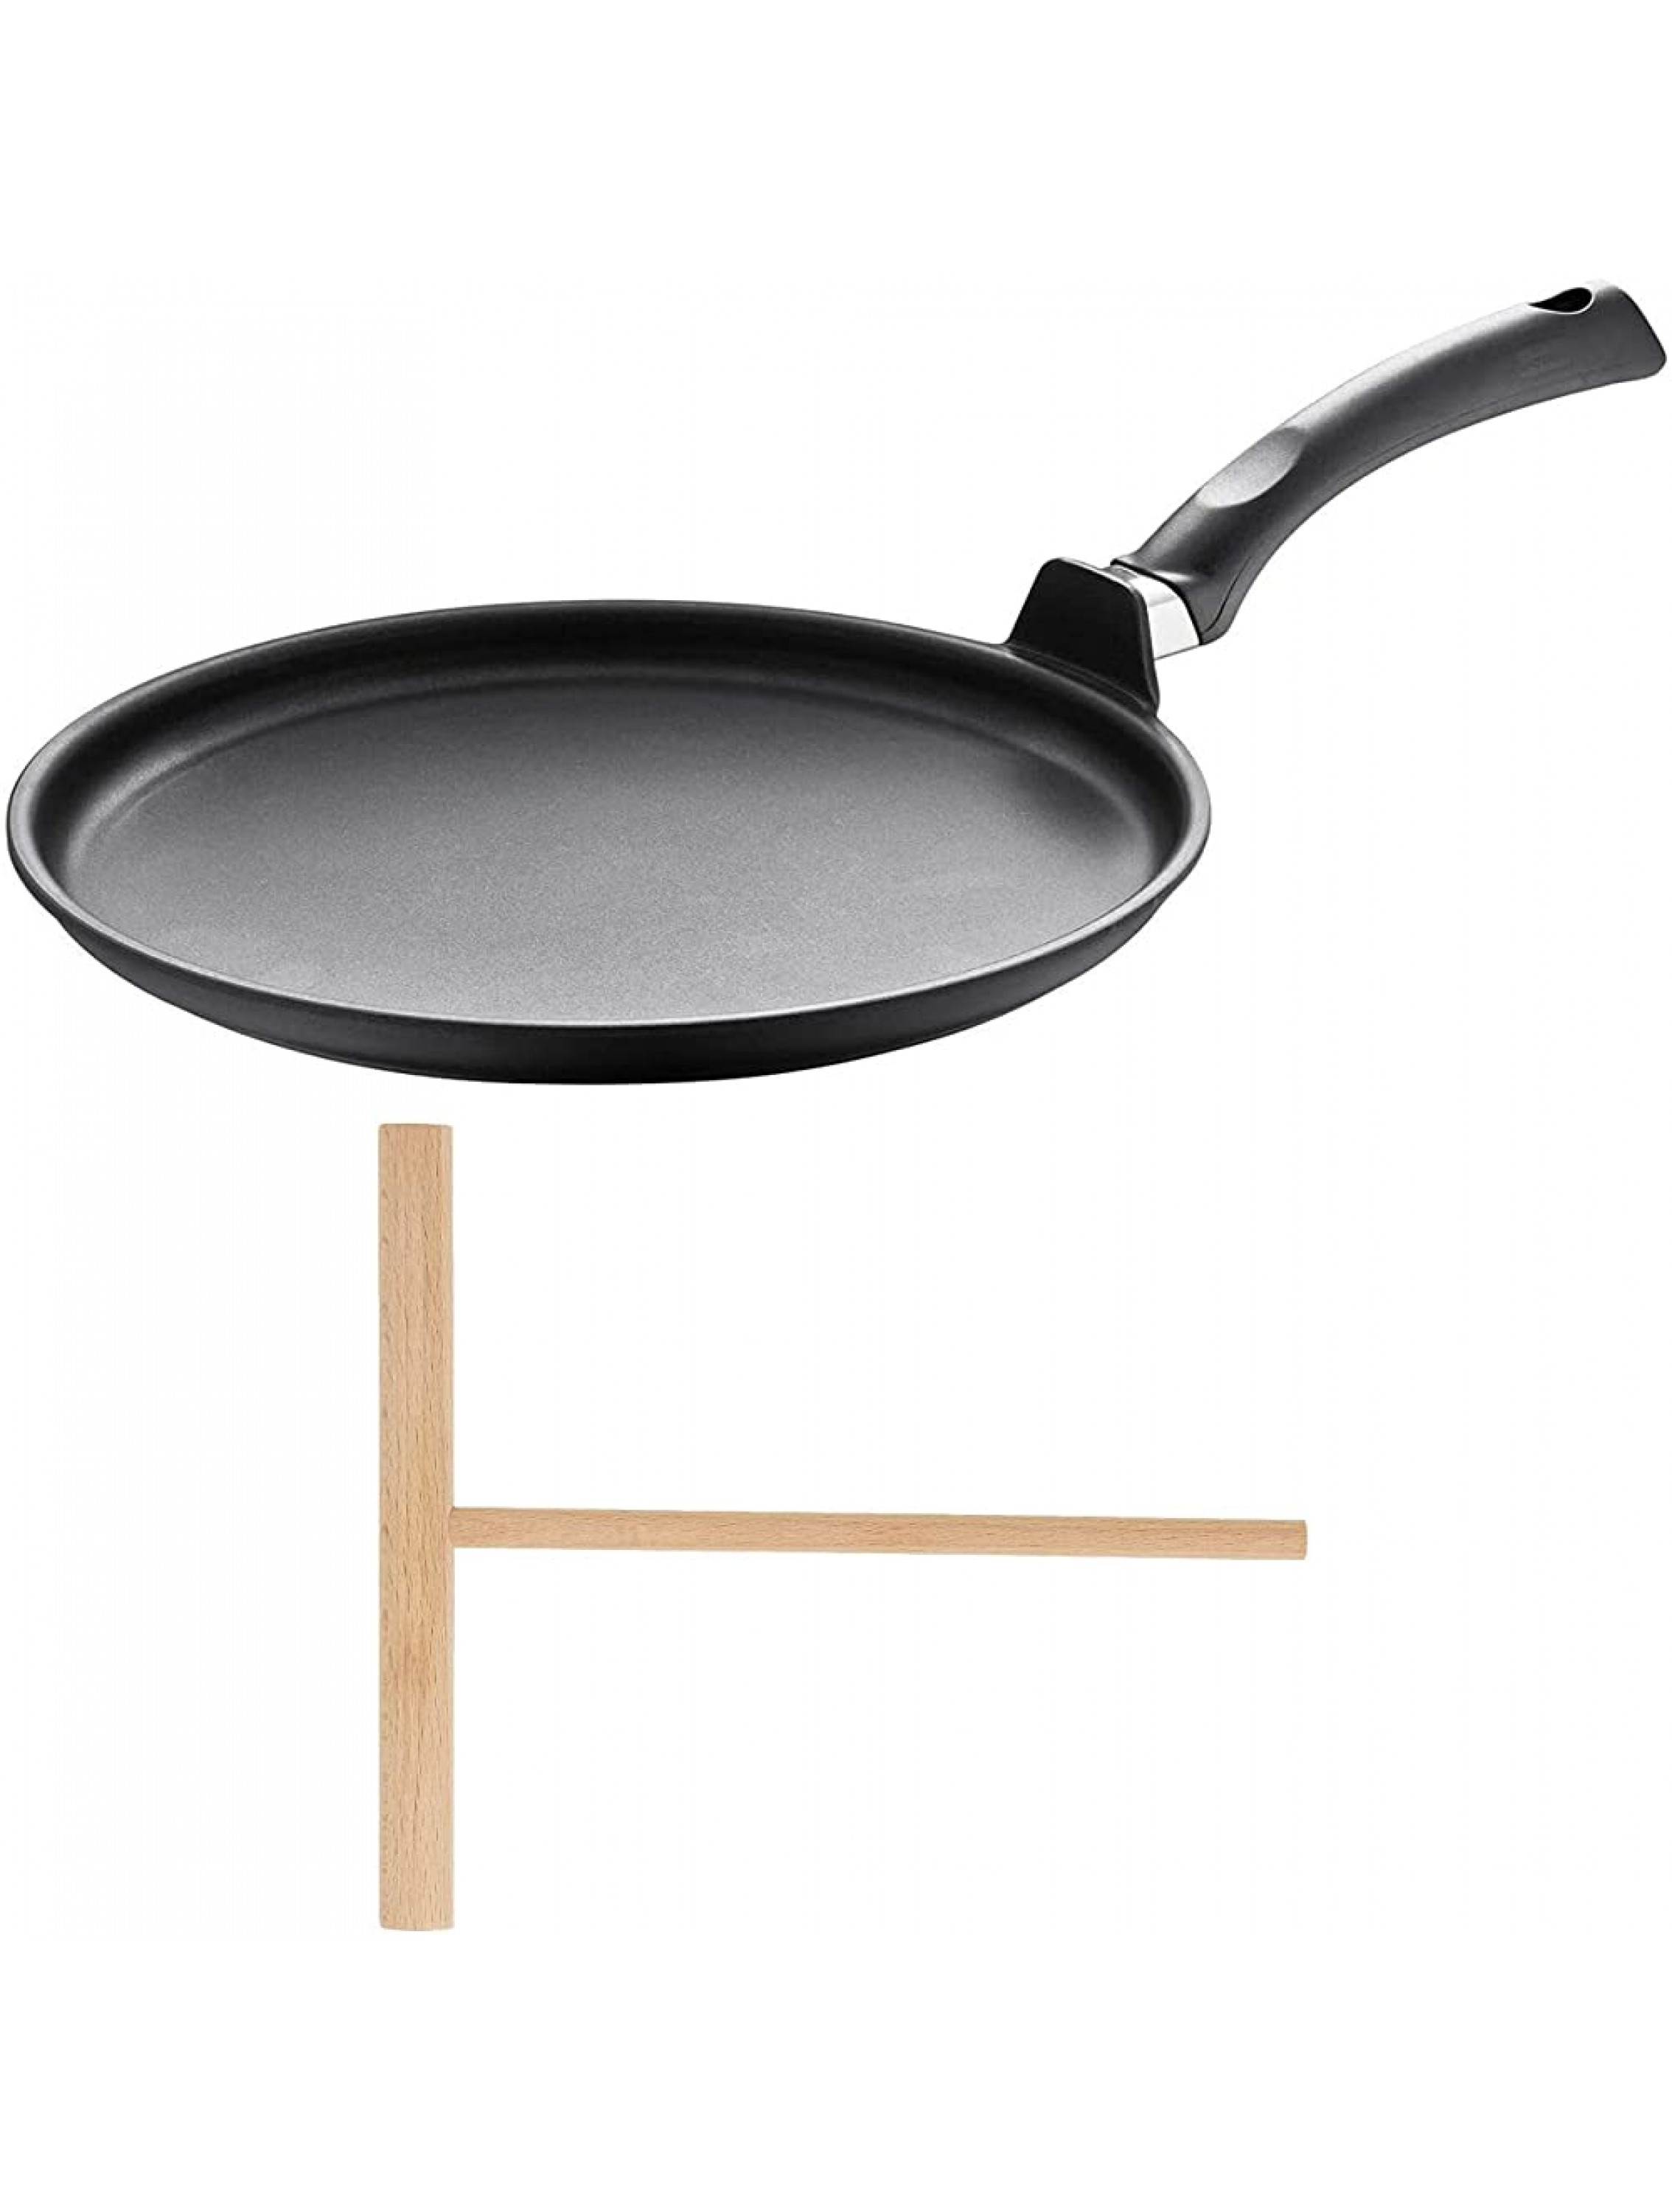 Berndes 611288 Specialty 11.5-Inch Crepe Pan with Crepe Spreader Bundle 2 Items - B7YTUQYE1